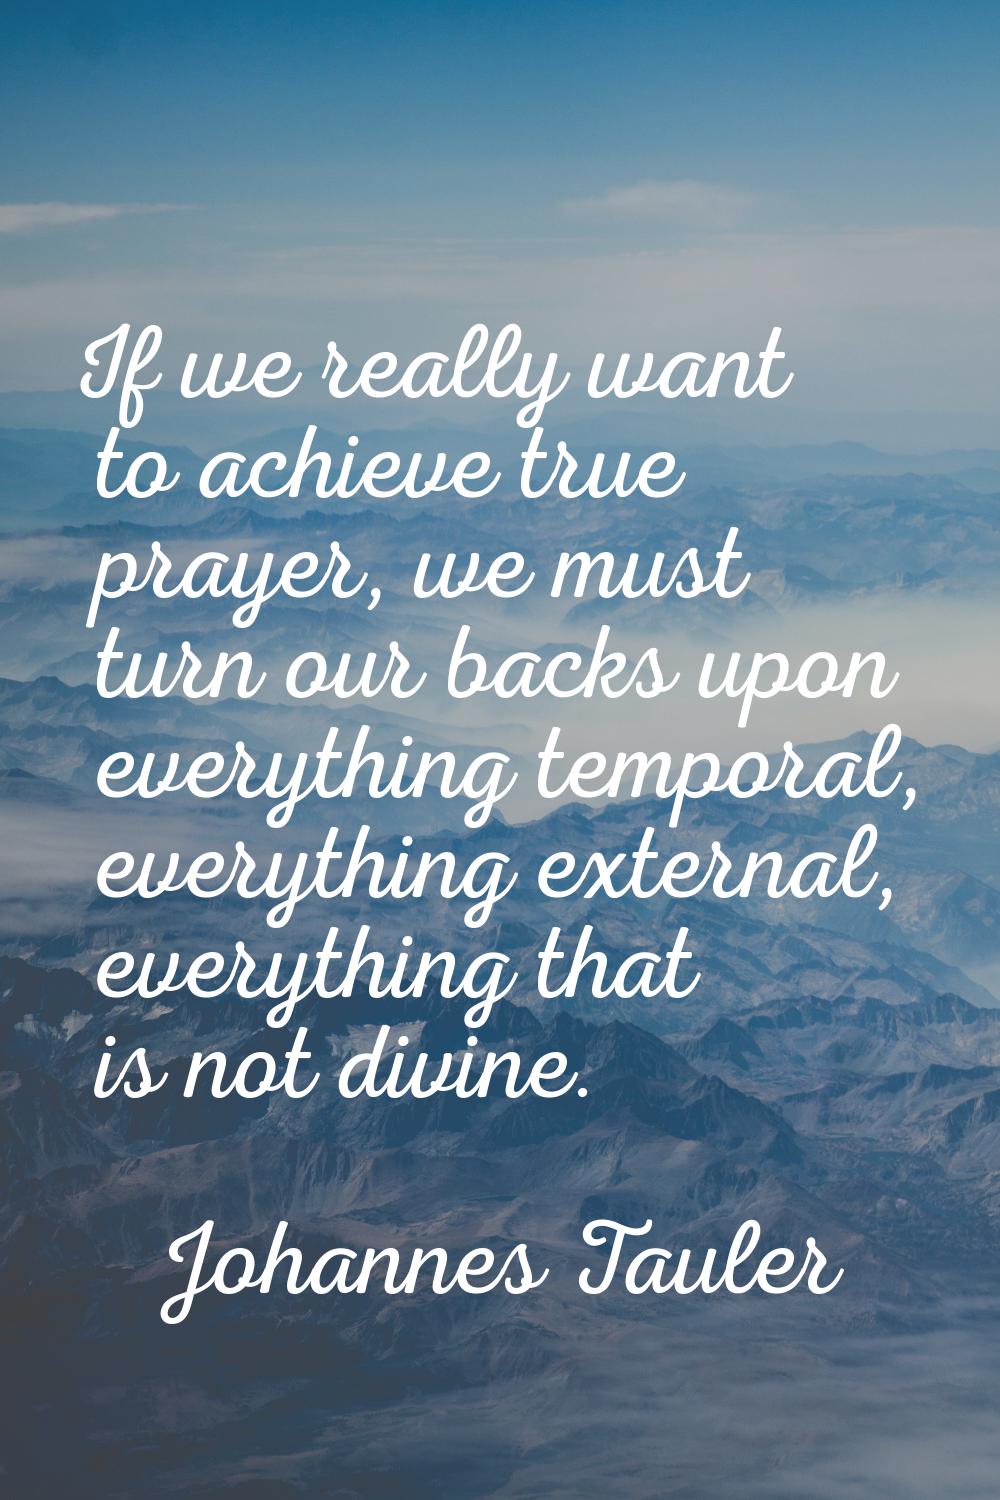 If we really want to achieve true prayer, we must turn our backs upon everything temporal, everythi